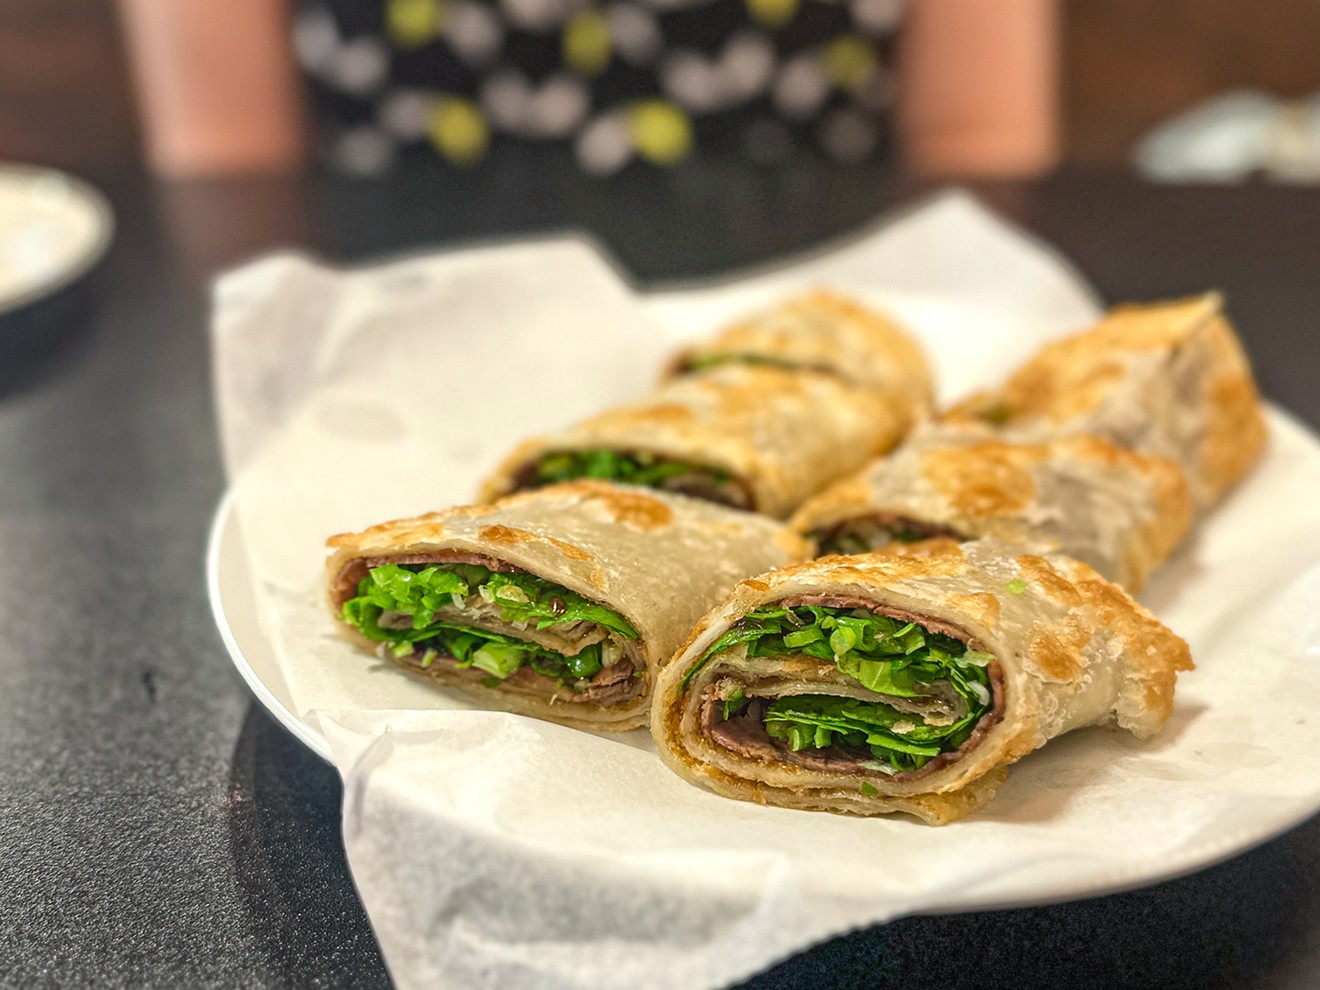 We lose the noodle-pulling floor show from the prior resident but gain some delectable treats from Steam Dumpling such as the beef roll pancake.